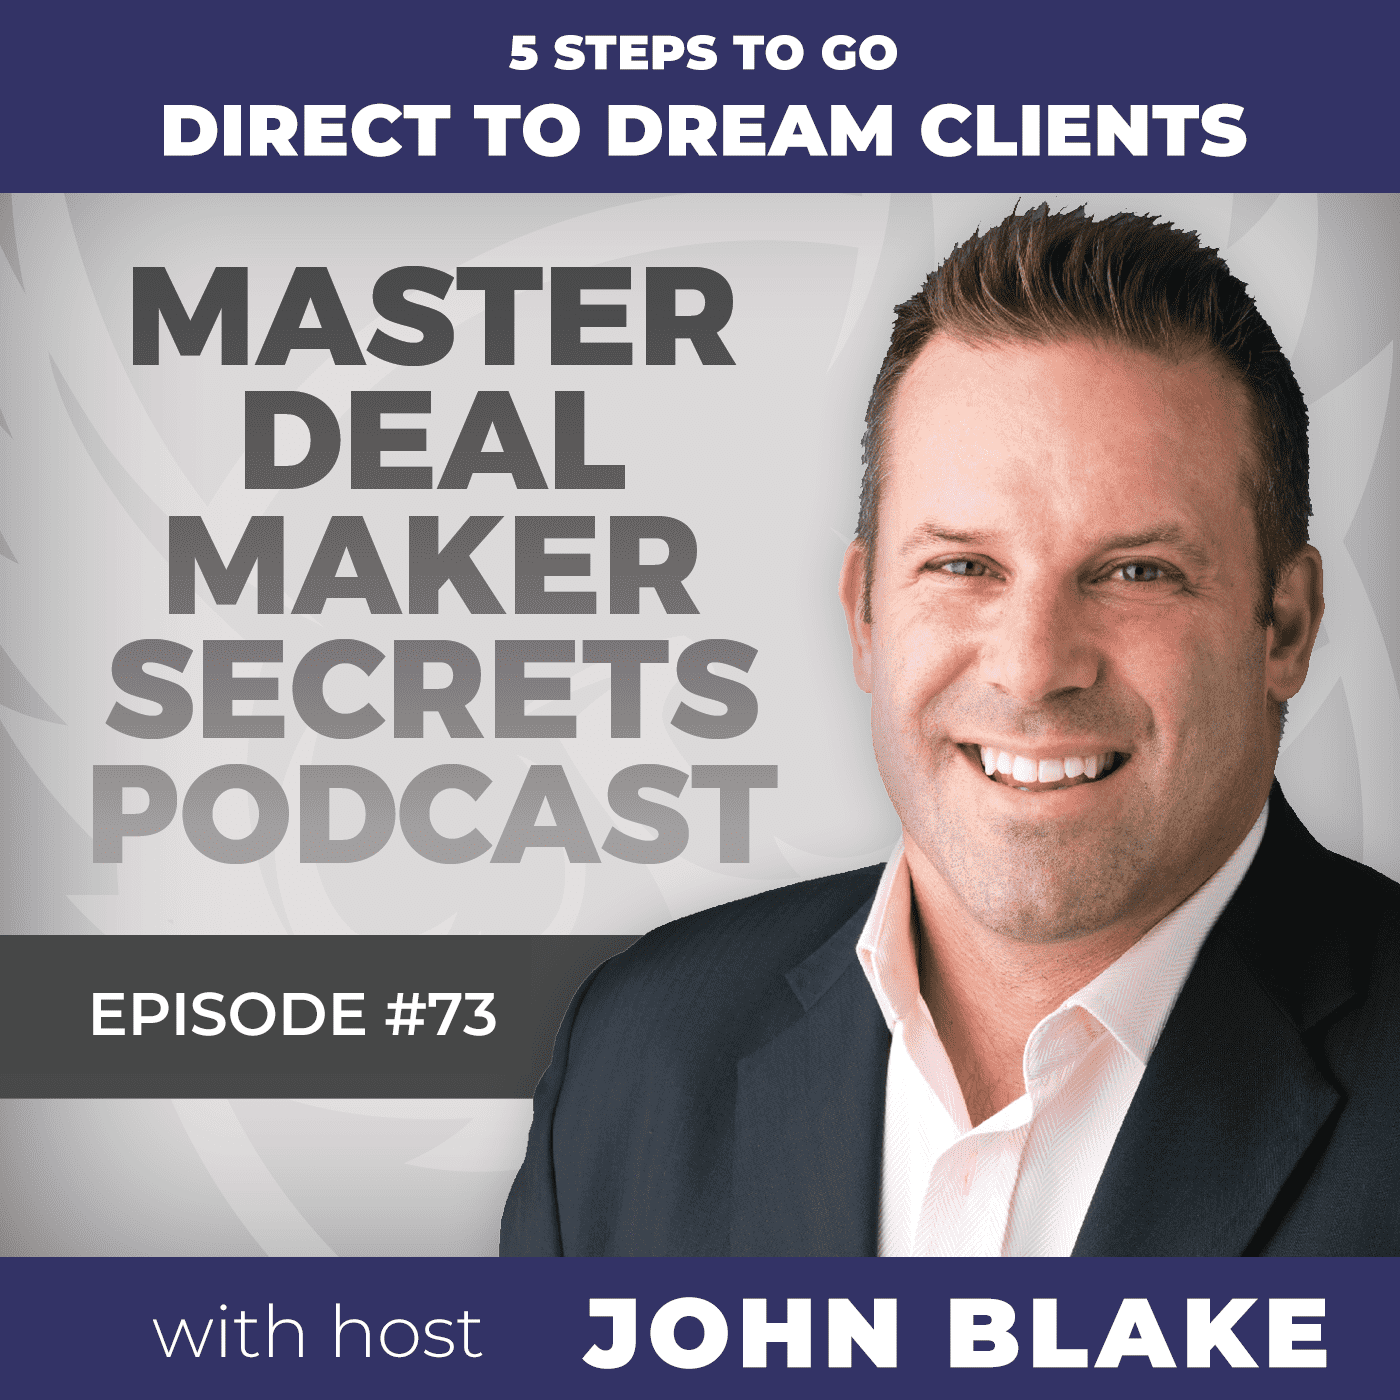 John Blake Five Steps to Go Direct to Dream Clients